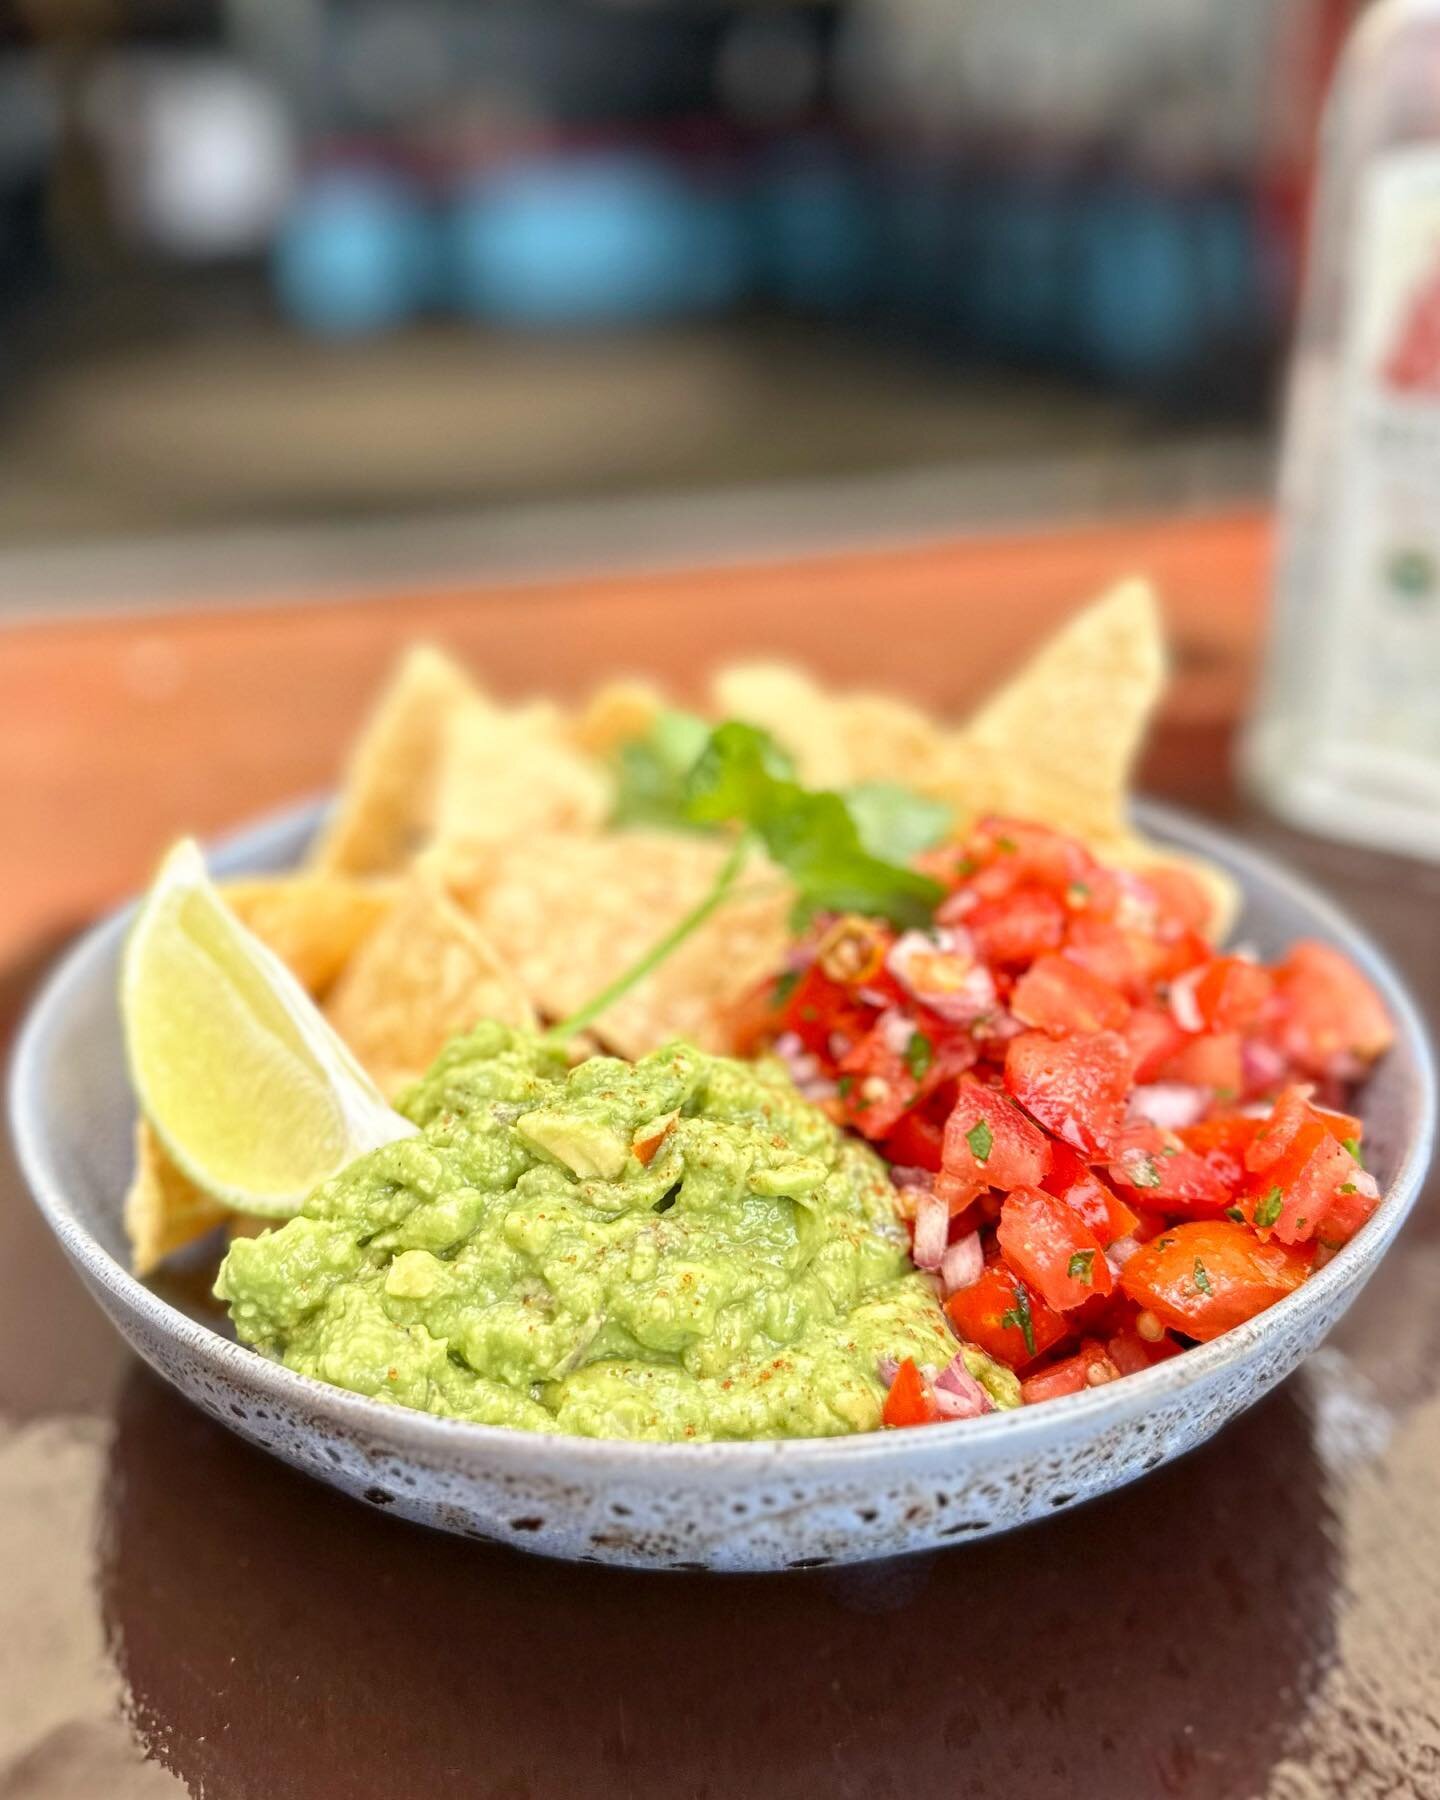 Get snacking with some Totopos and a side of Margaritas before some tacos and more Margaritas 😉 

#chihuahuabyron #byronbaymexican #byronmargaritas